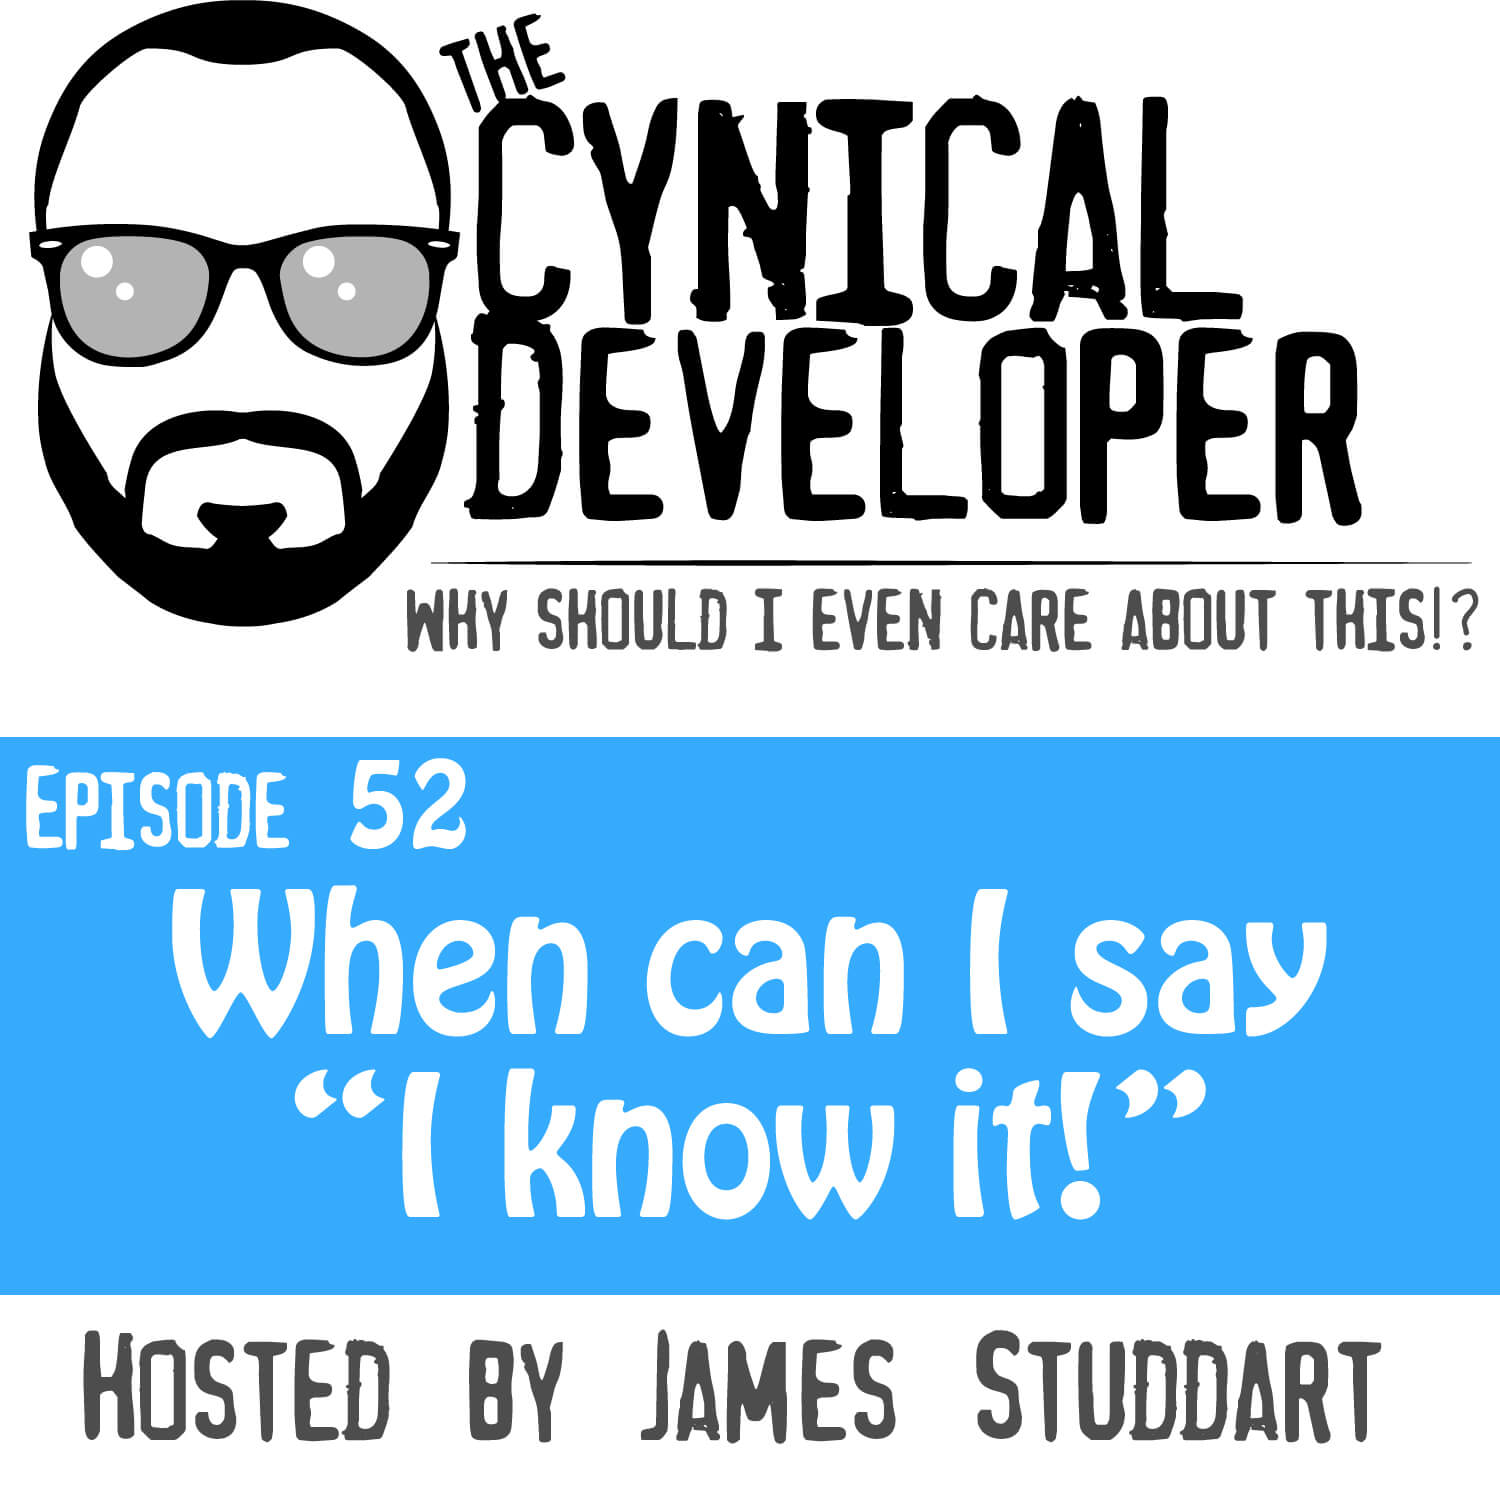 Episode 52 - When can I say "I know it!"